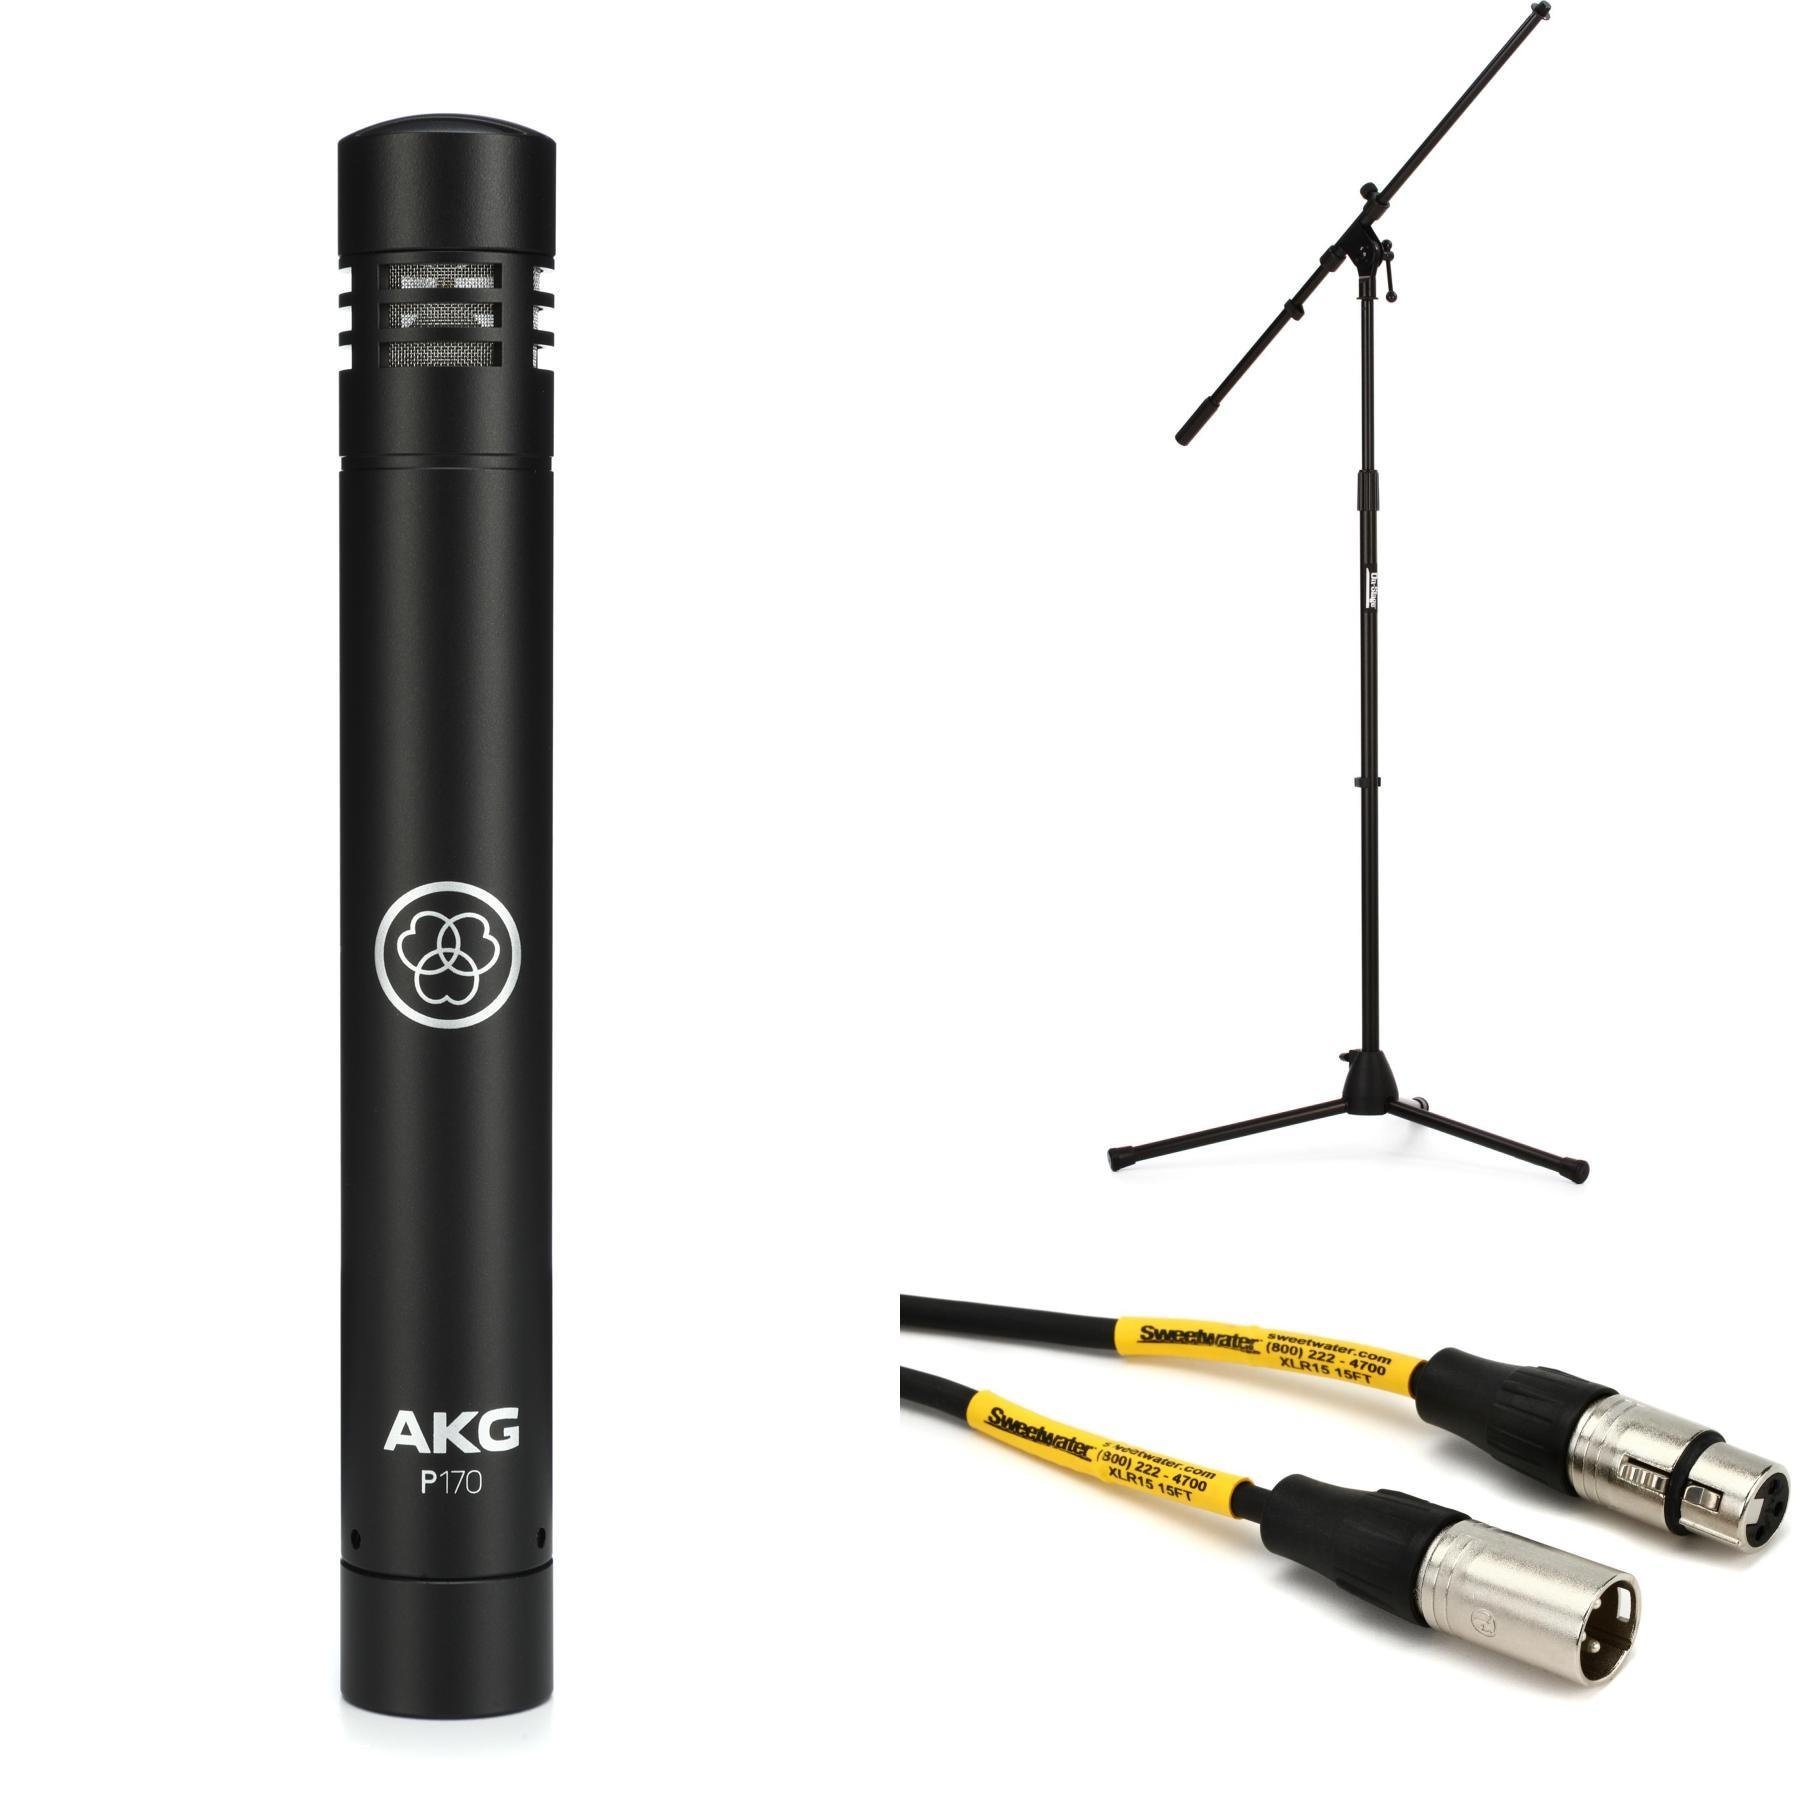 AKG P170 Professional Instrumental Microphone with Headphones and XLR Cable